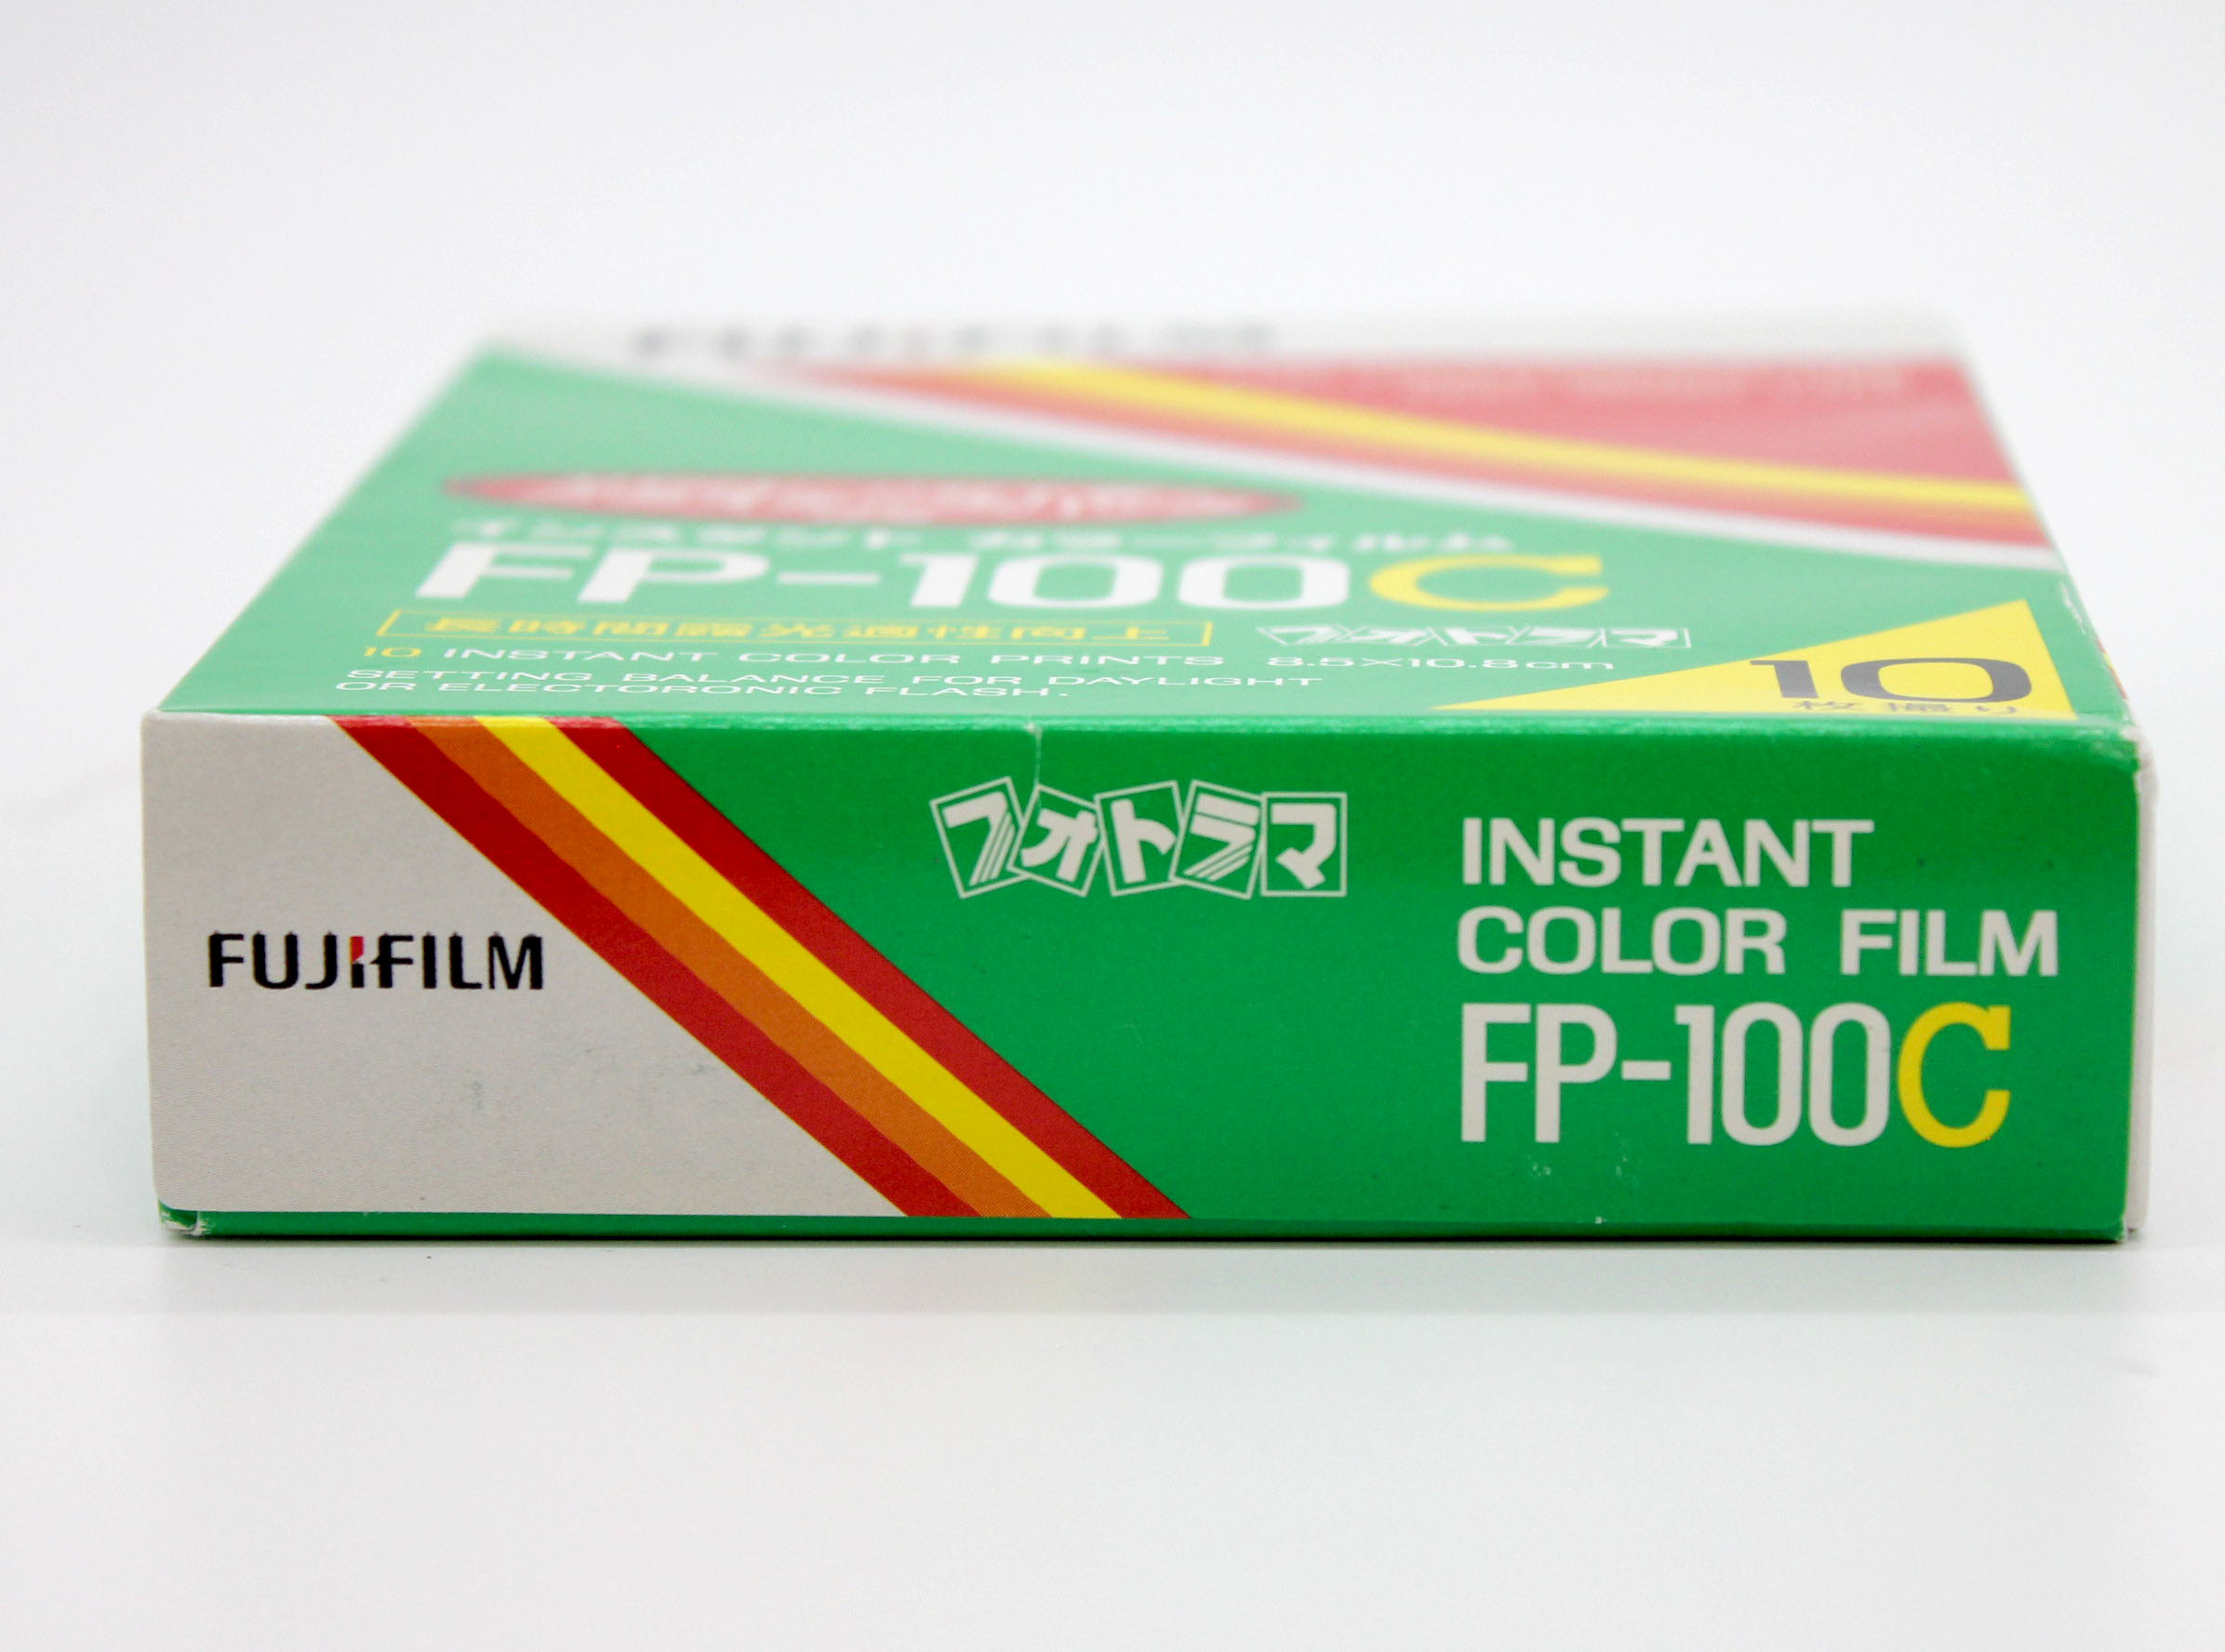  Fujifilm FP-100C Professional Instant Color Film Expired 11/2017 from Japan Photo 5